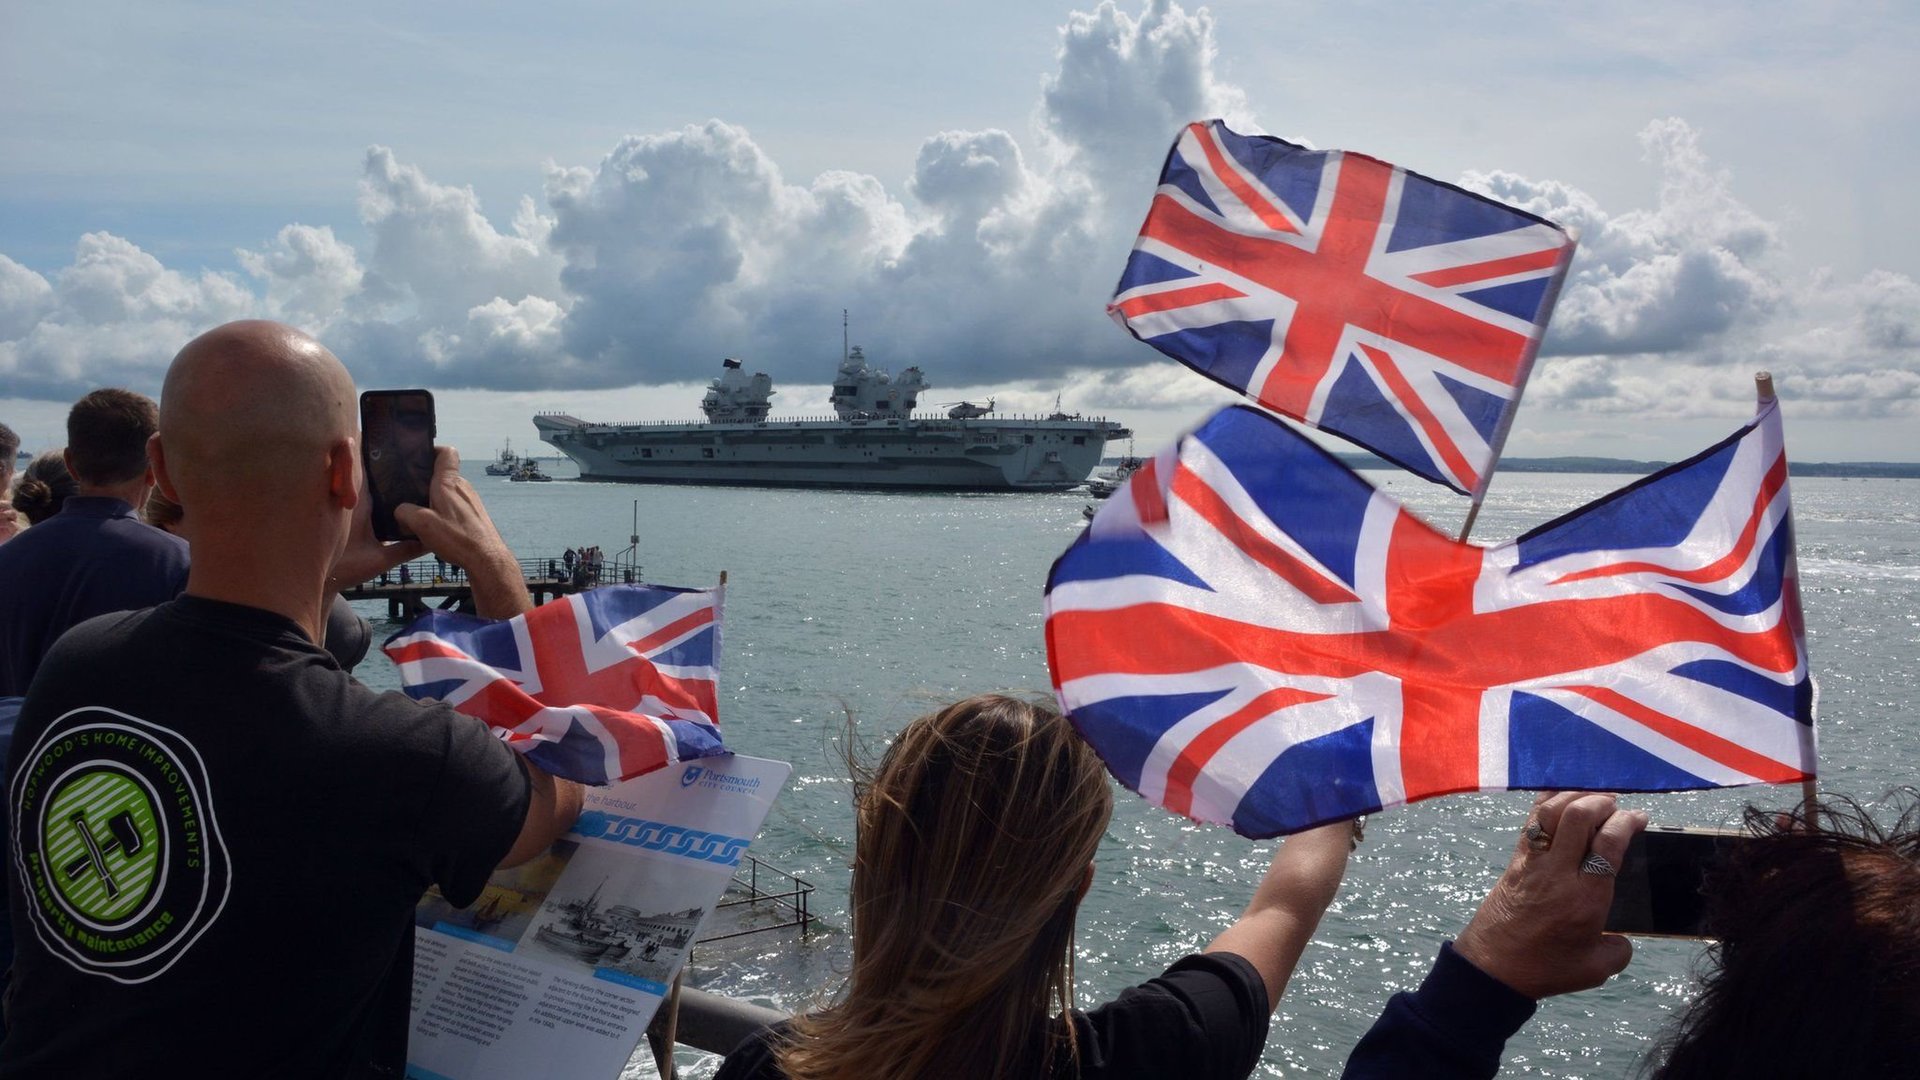 HMS Prince of Wales fails to depart for Nato exercises